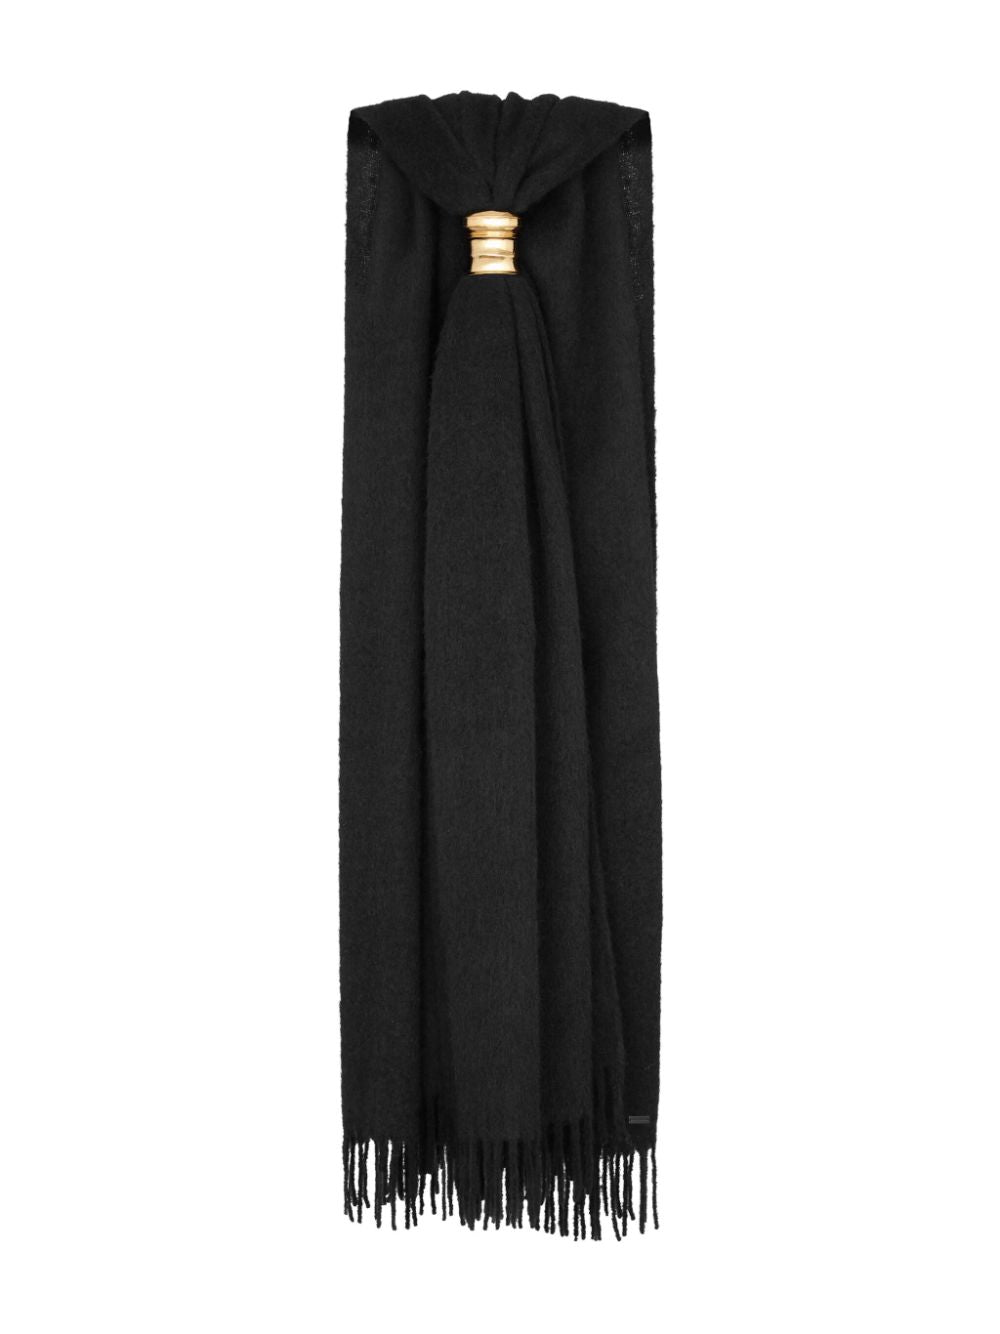 Black Fringed Scarf with Gold Hardware and Ring Design